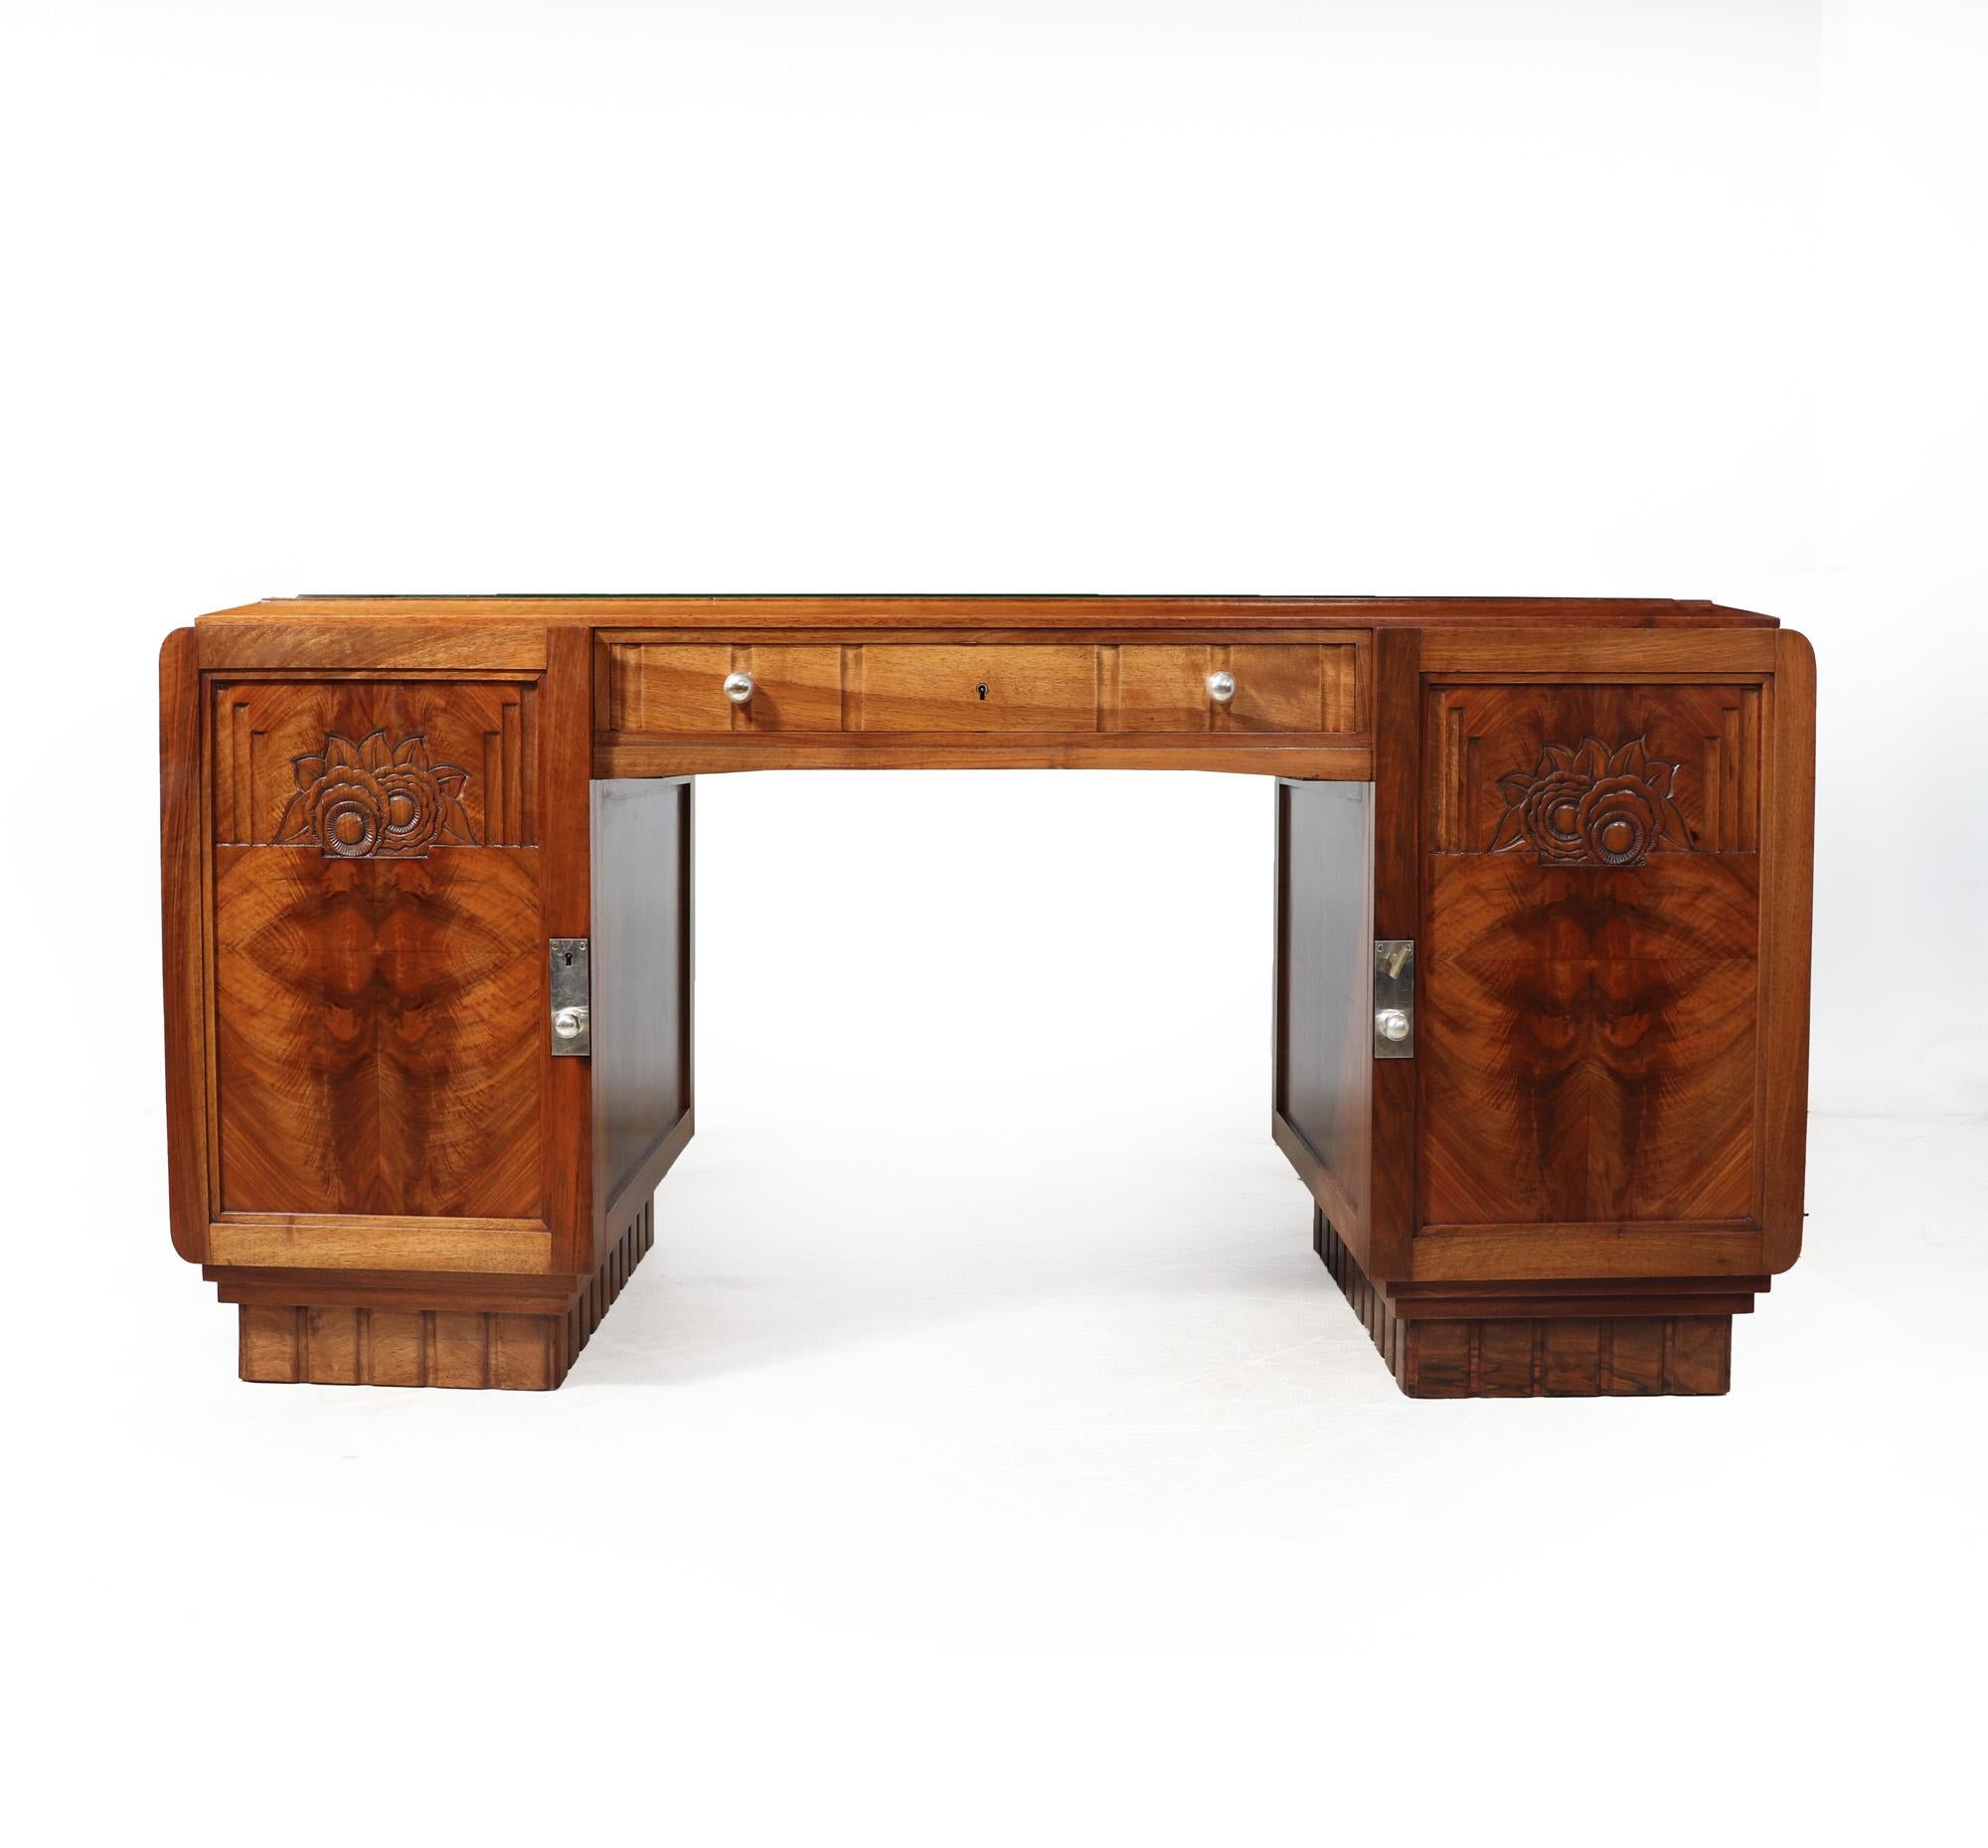 FRENCH ART DECO DESK IN WALNUT
An Excellent quality twin pedestal desk attributed to Paul Follot, in solid and figured walnut having a plate glass top and silver plated escutcheons, handles and key, the desk has one centre drawer two lockable doors